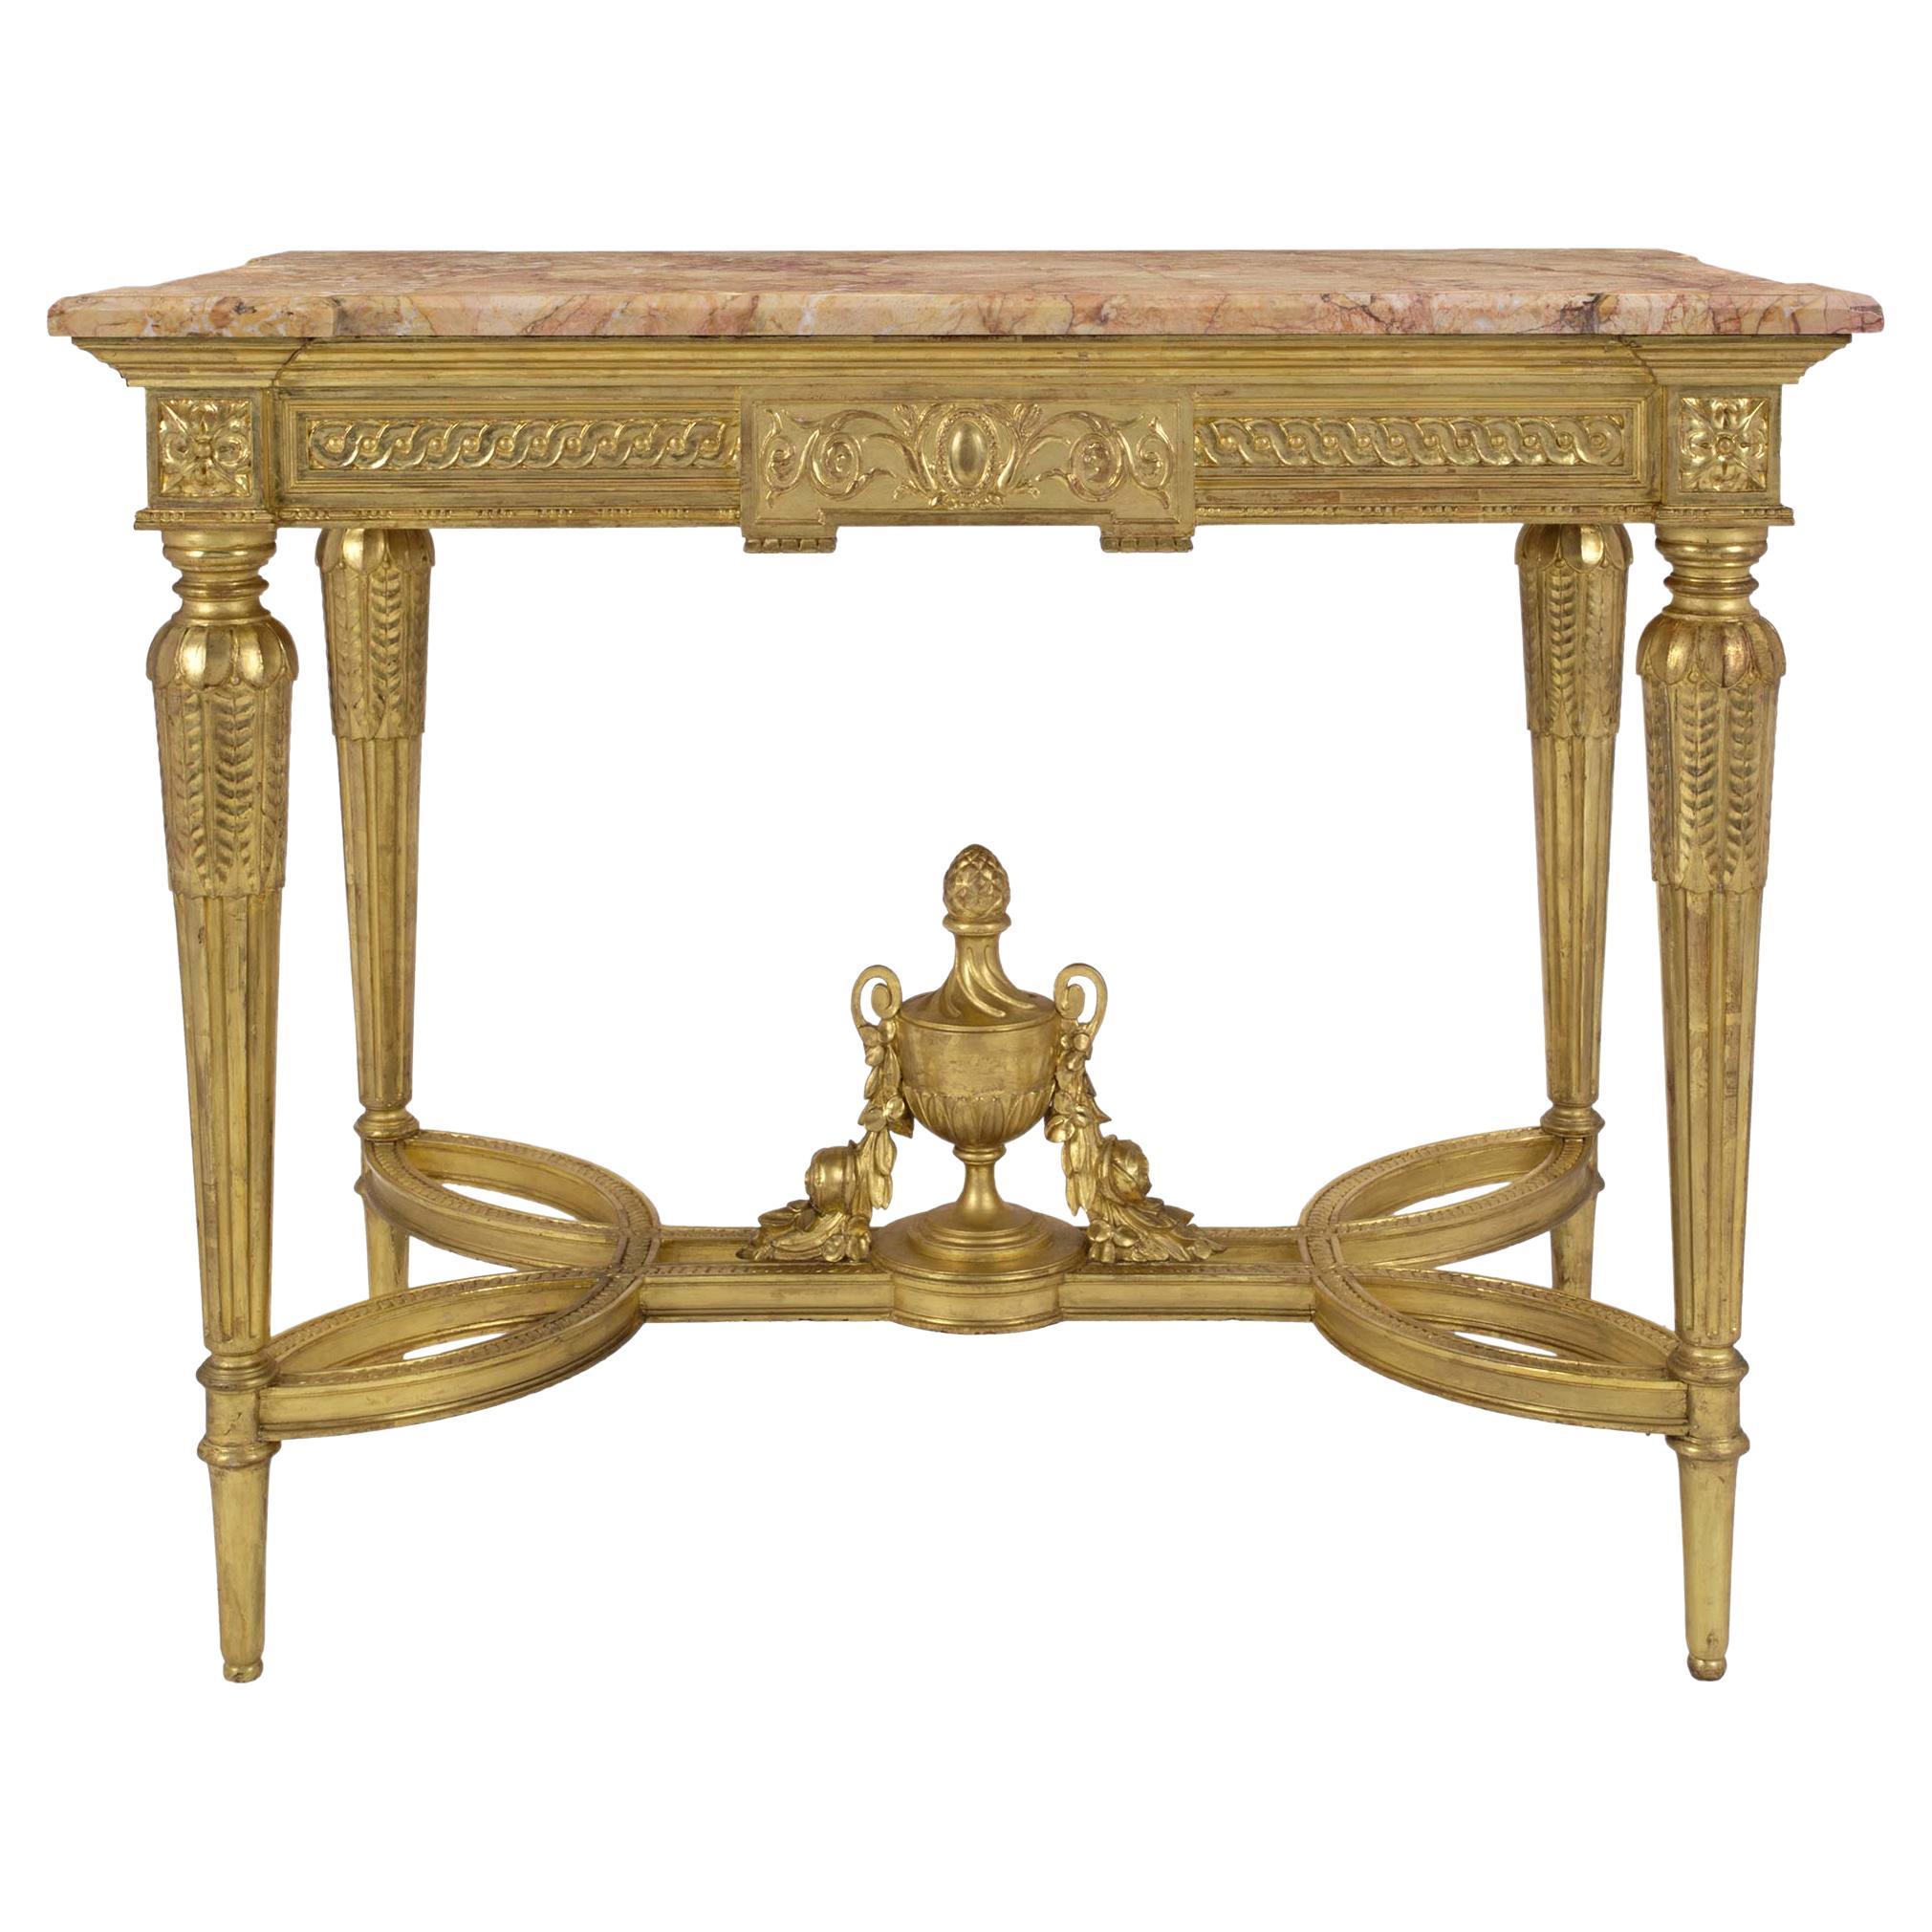 French 19th Century Louis XVI Style Giltwood and Marble Center Table